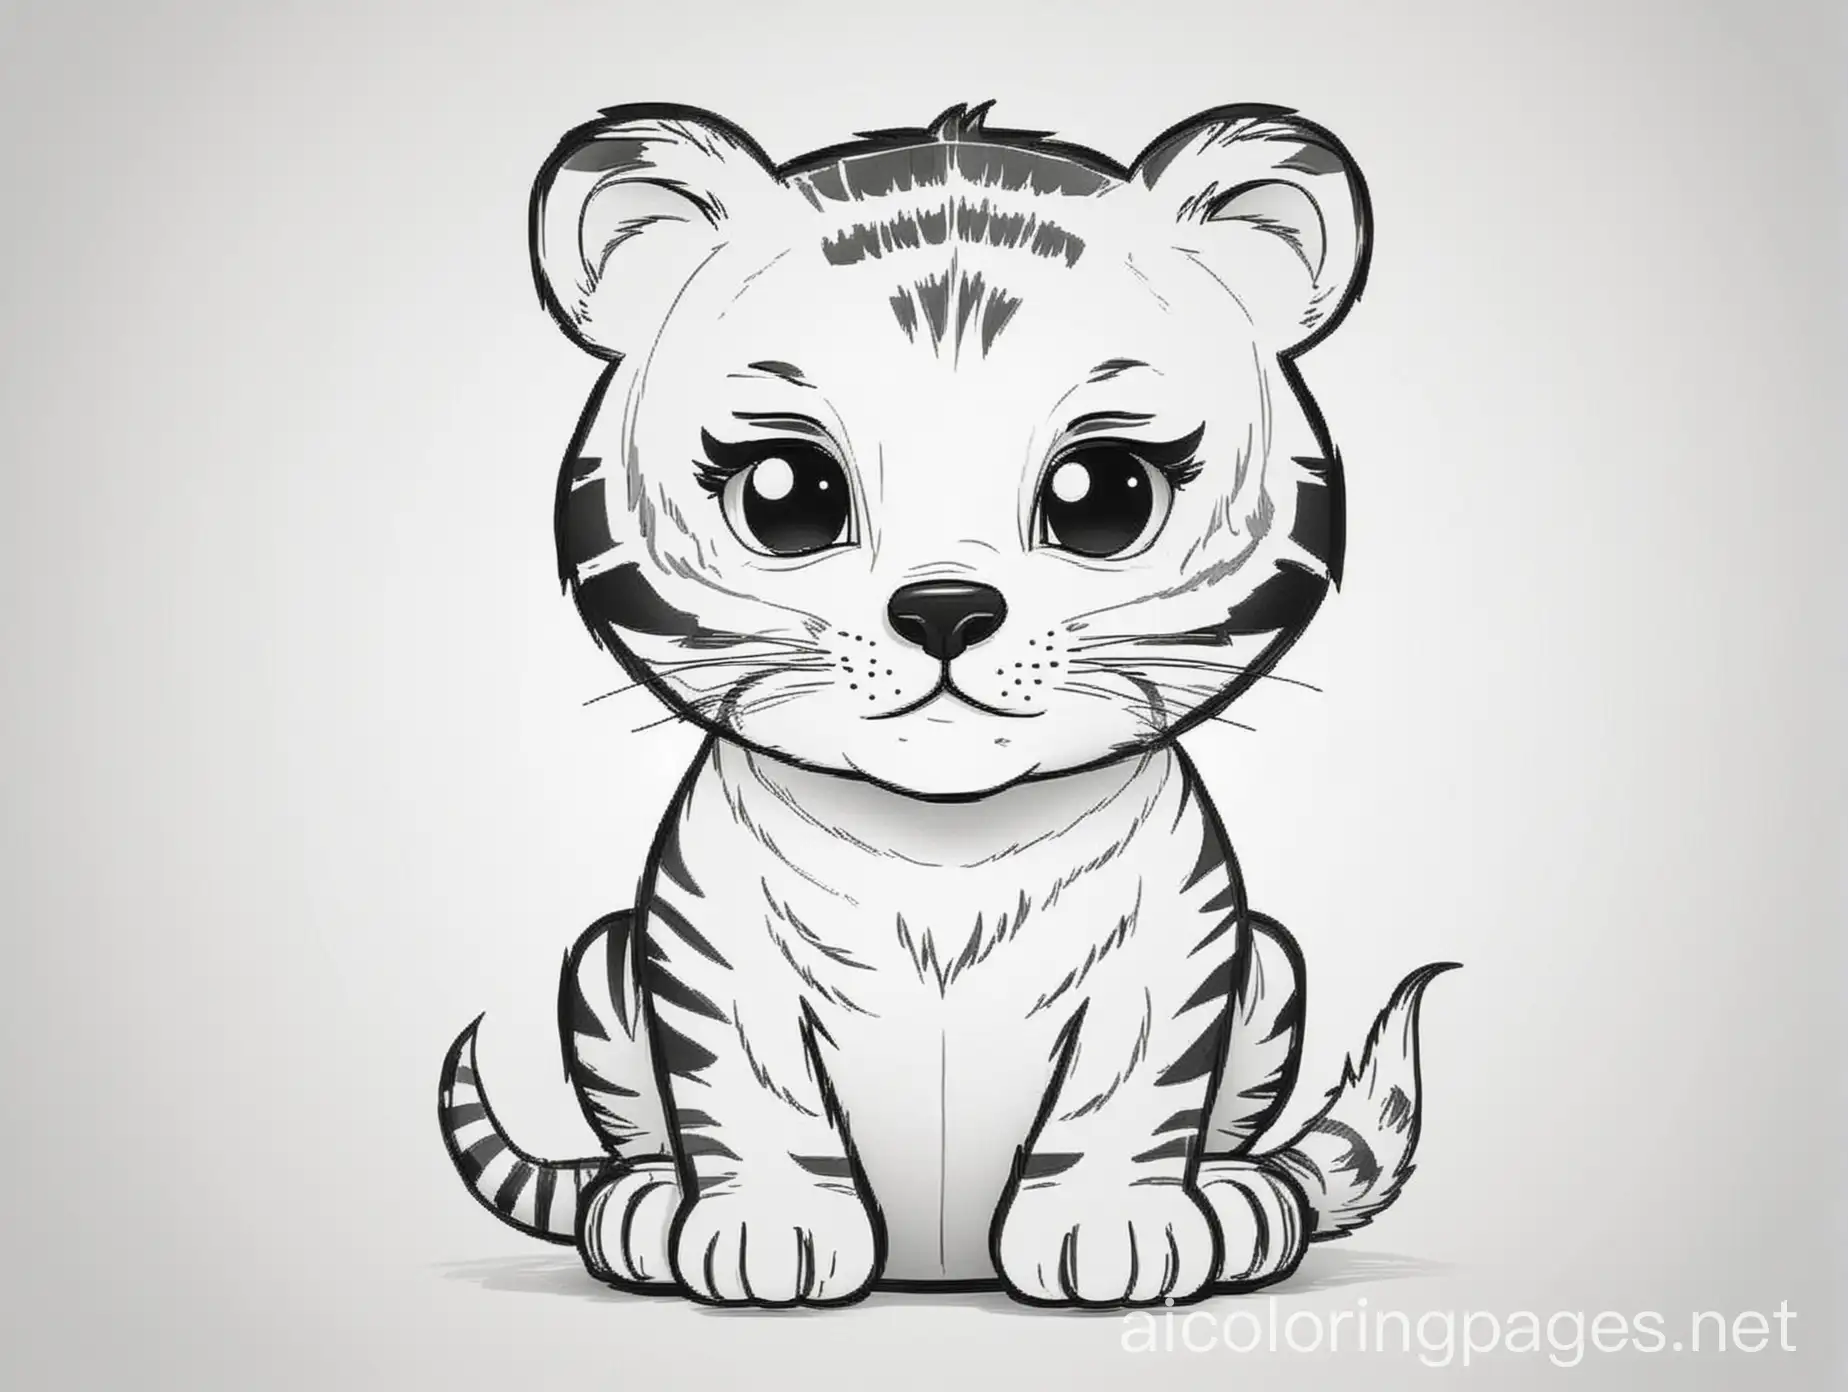 abstract shape of a cute and adorable tiger, facing the viewer, coloring page, Coloring Page, black and white, line art, white background, Simplicity, Ample White Space. The background of the coloring page is plain white to make it easy for young children to color within the lines. The outlines of all the subjects are easy to distinguish, making it simple for kids to color without too much difficulty, Coloring Page, black and white, line art, white background, Simplicity, Ample White Space. The background of the coloring page is plain white to make it easy for young children to color within the lines. The outlines of all the subjects are easy to distinguish, making it simple for kids to color without too much difficulty